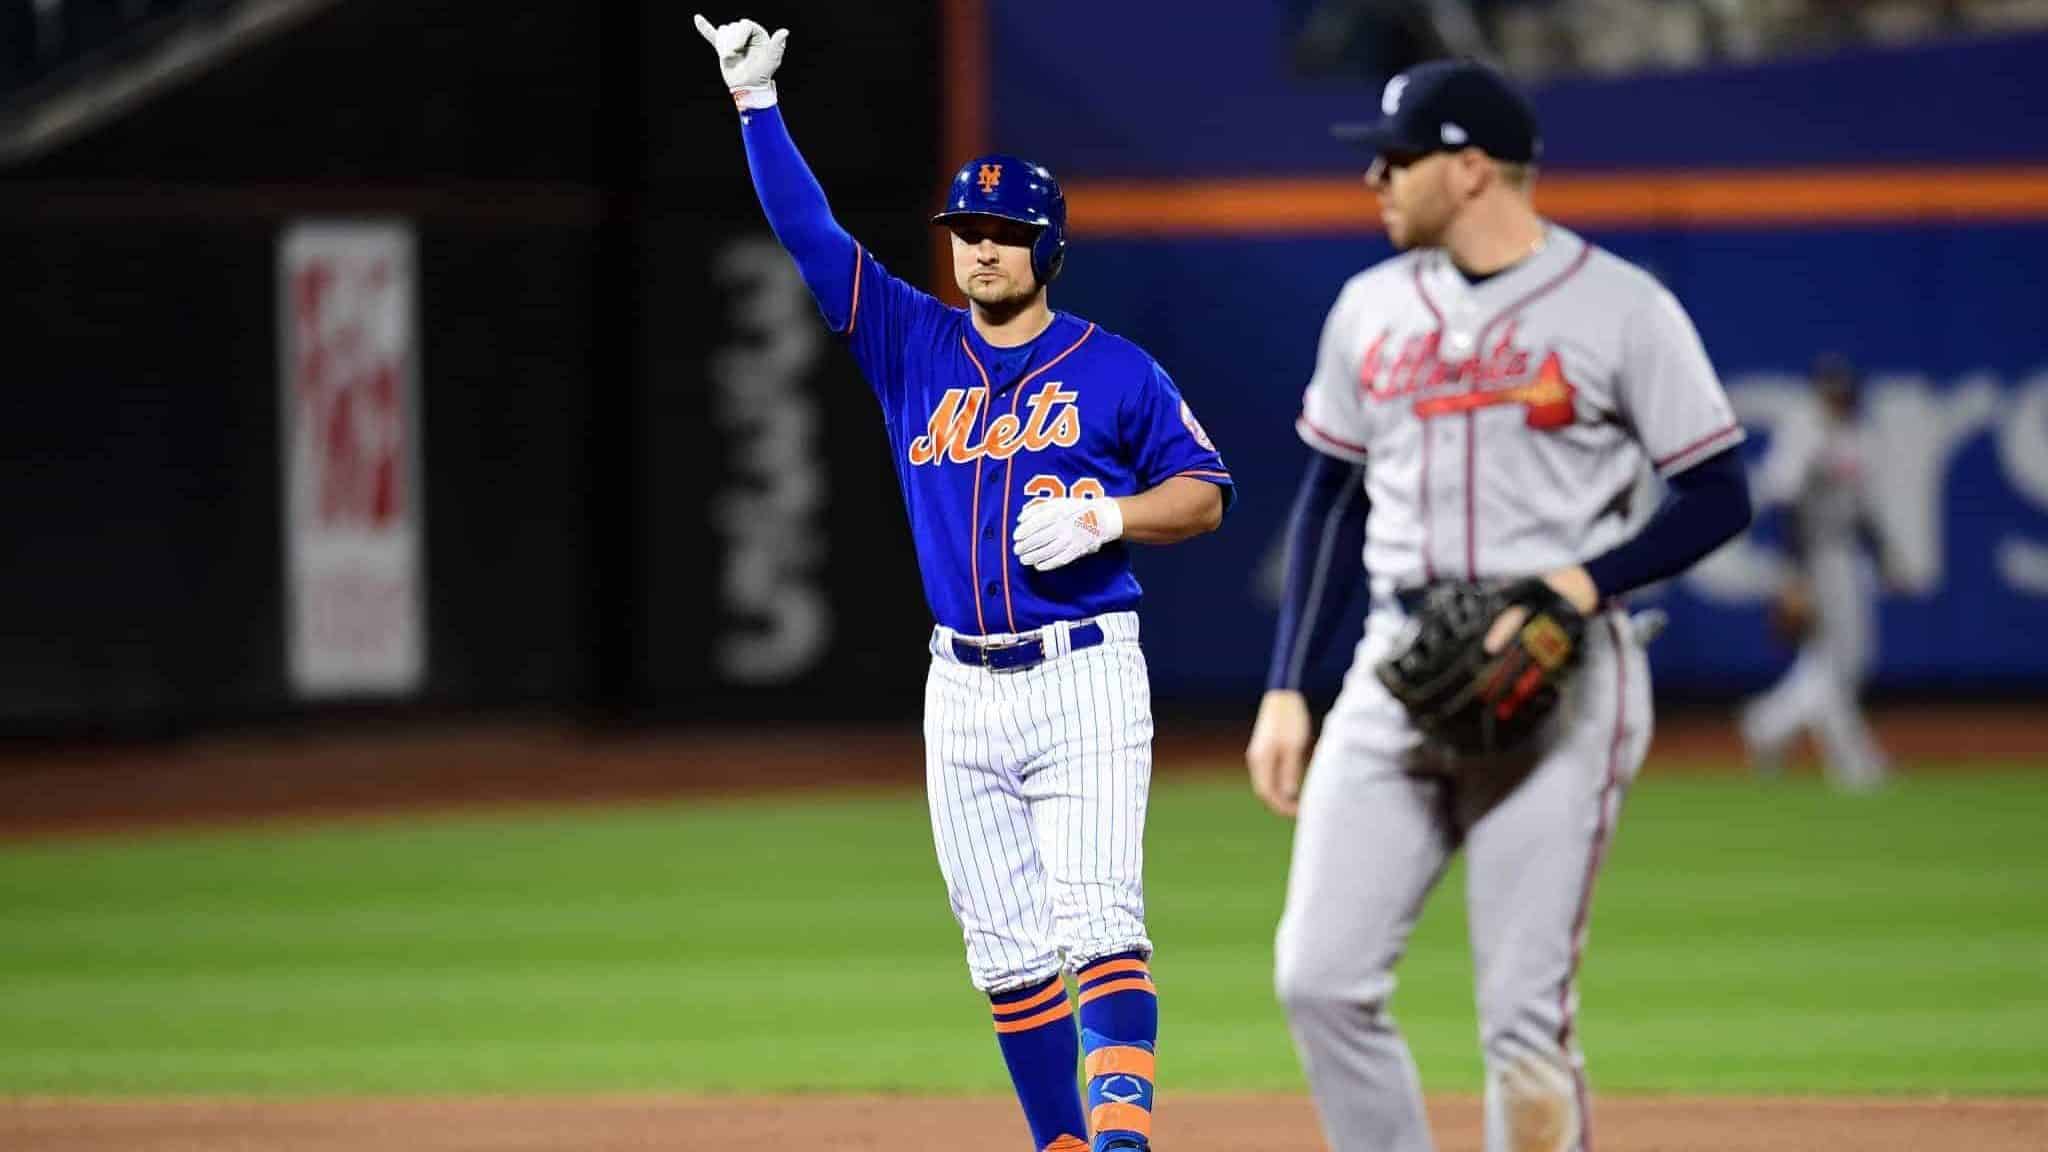 NEW YORK, NEW YORK - SEPTEMBER 27: J.D. Davis #28 of the New York Mets celebrates a double in the first inning of their game against the Atlanta Braves at Citi Field on September 27, 2019 in the Flushing neighborhood of the Queens borough of New York City.